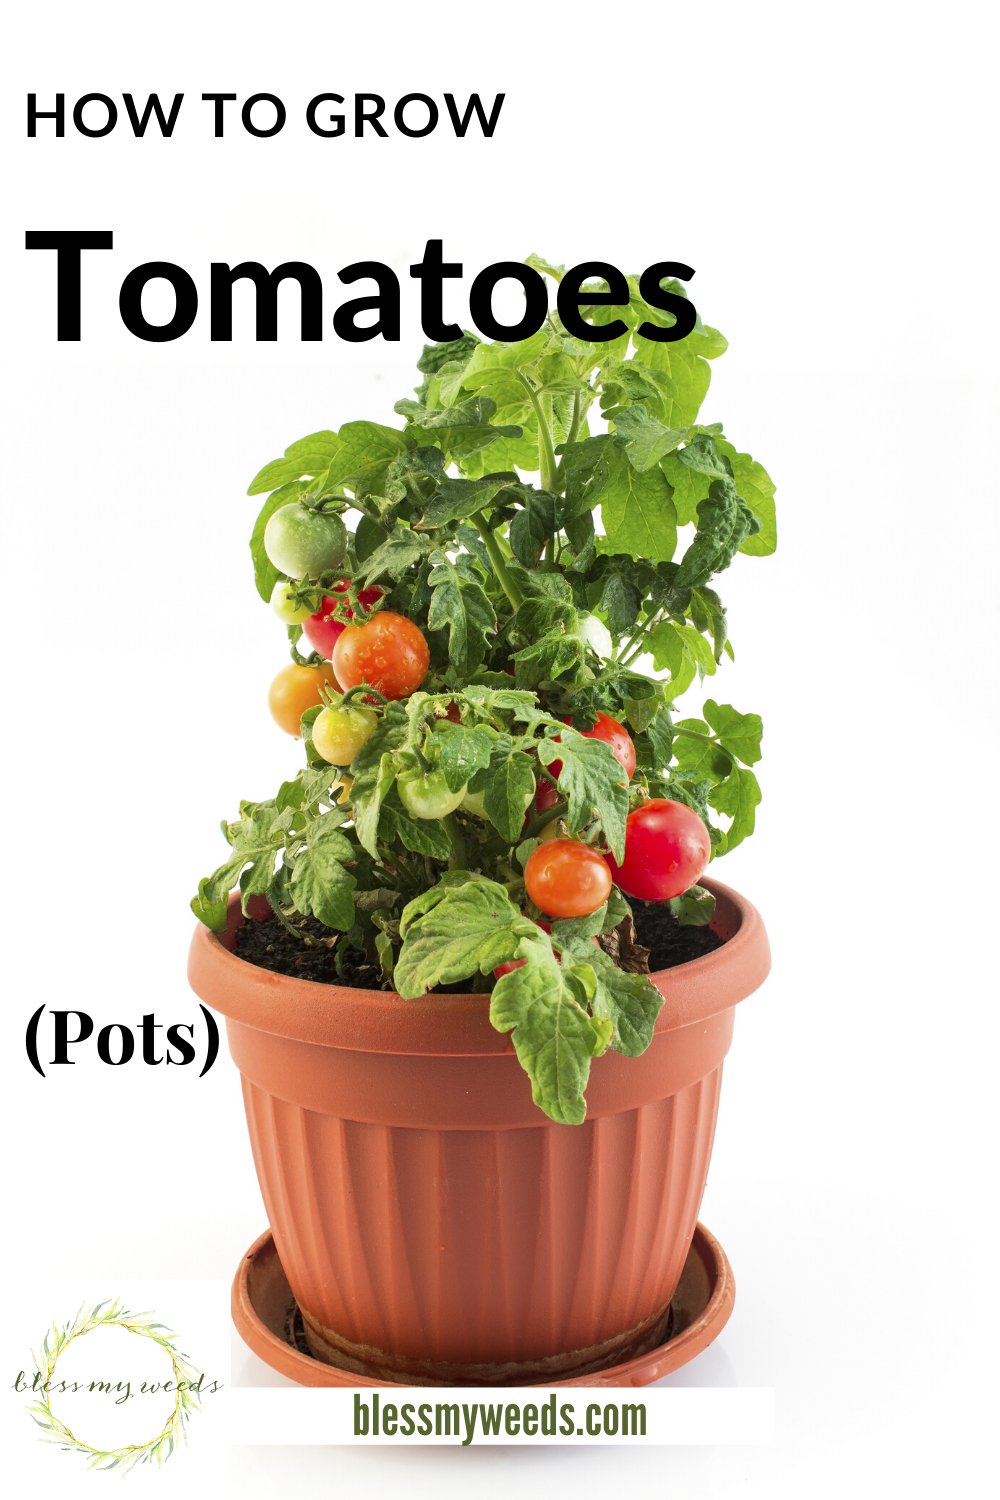 How To Grow Tomatoes In Containers How To Grow 5 Gallon Buckets Pots Raised Beds Garden Blessmyweeds Com,Healthy Lunches For Kids